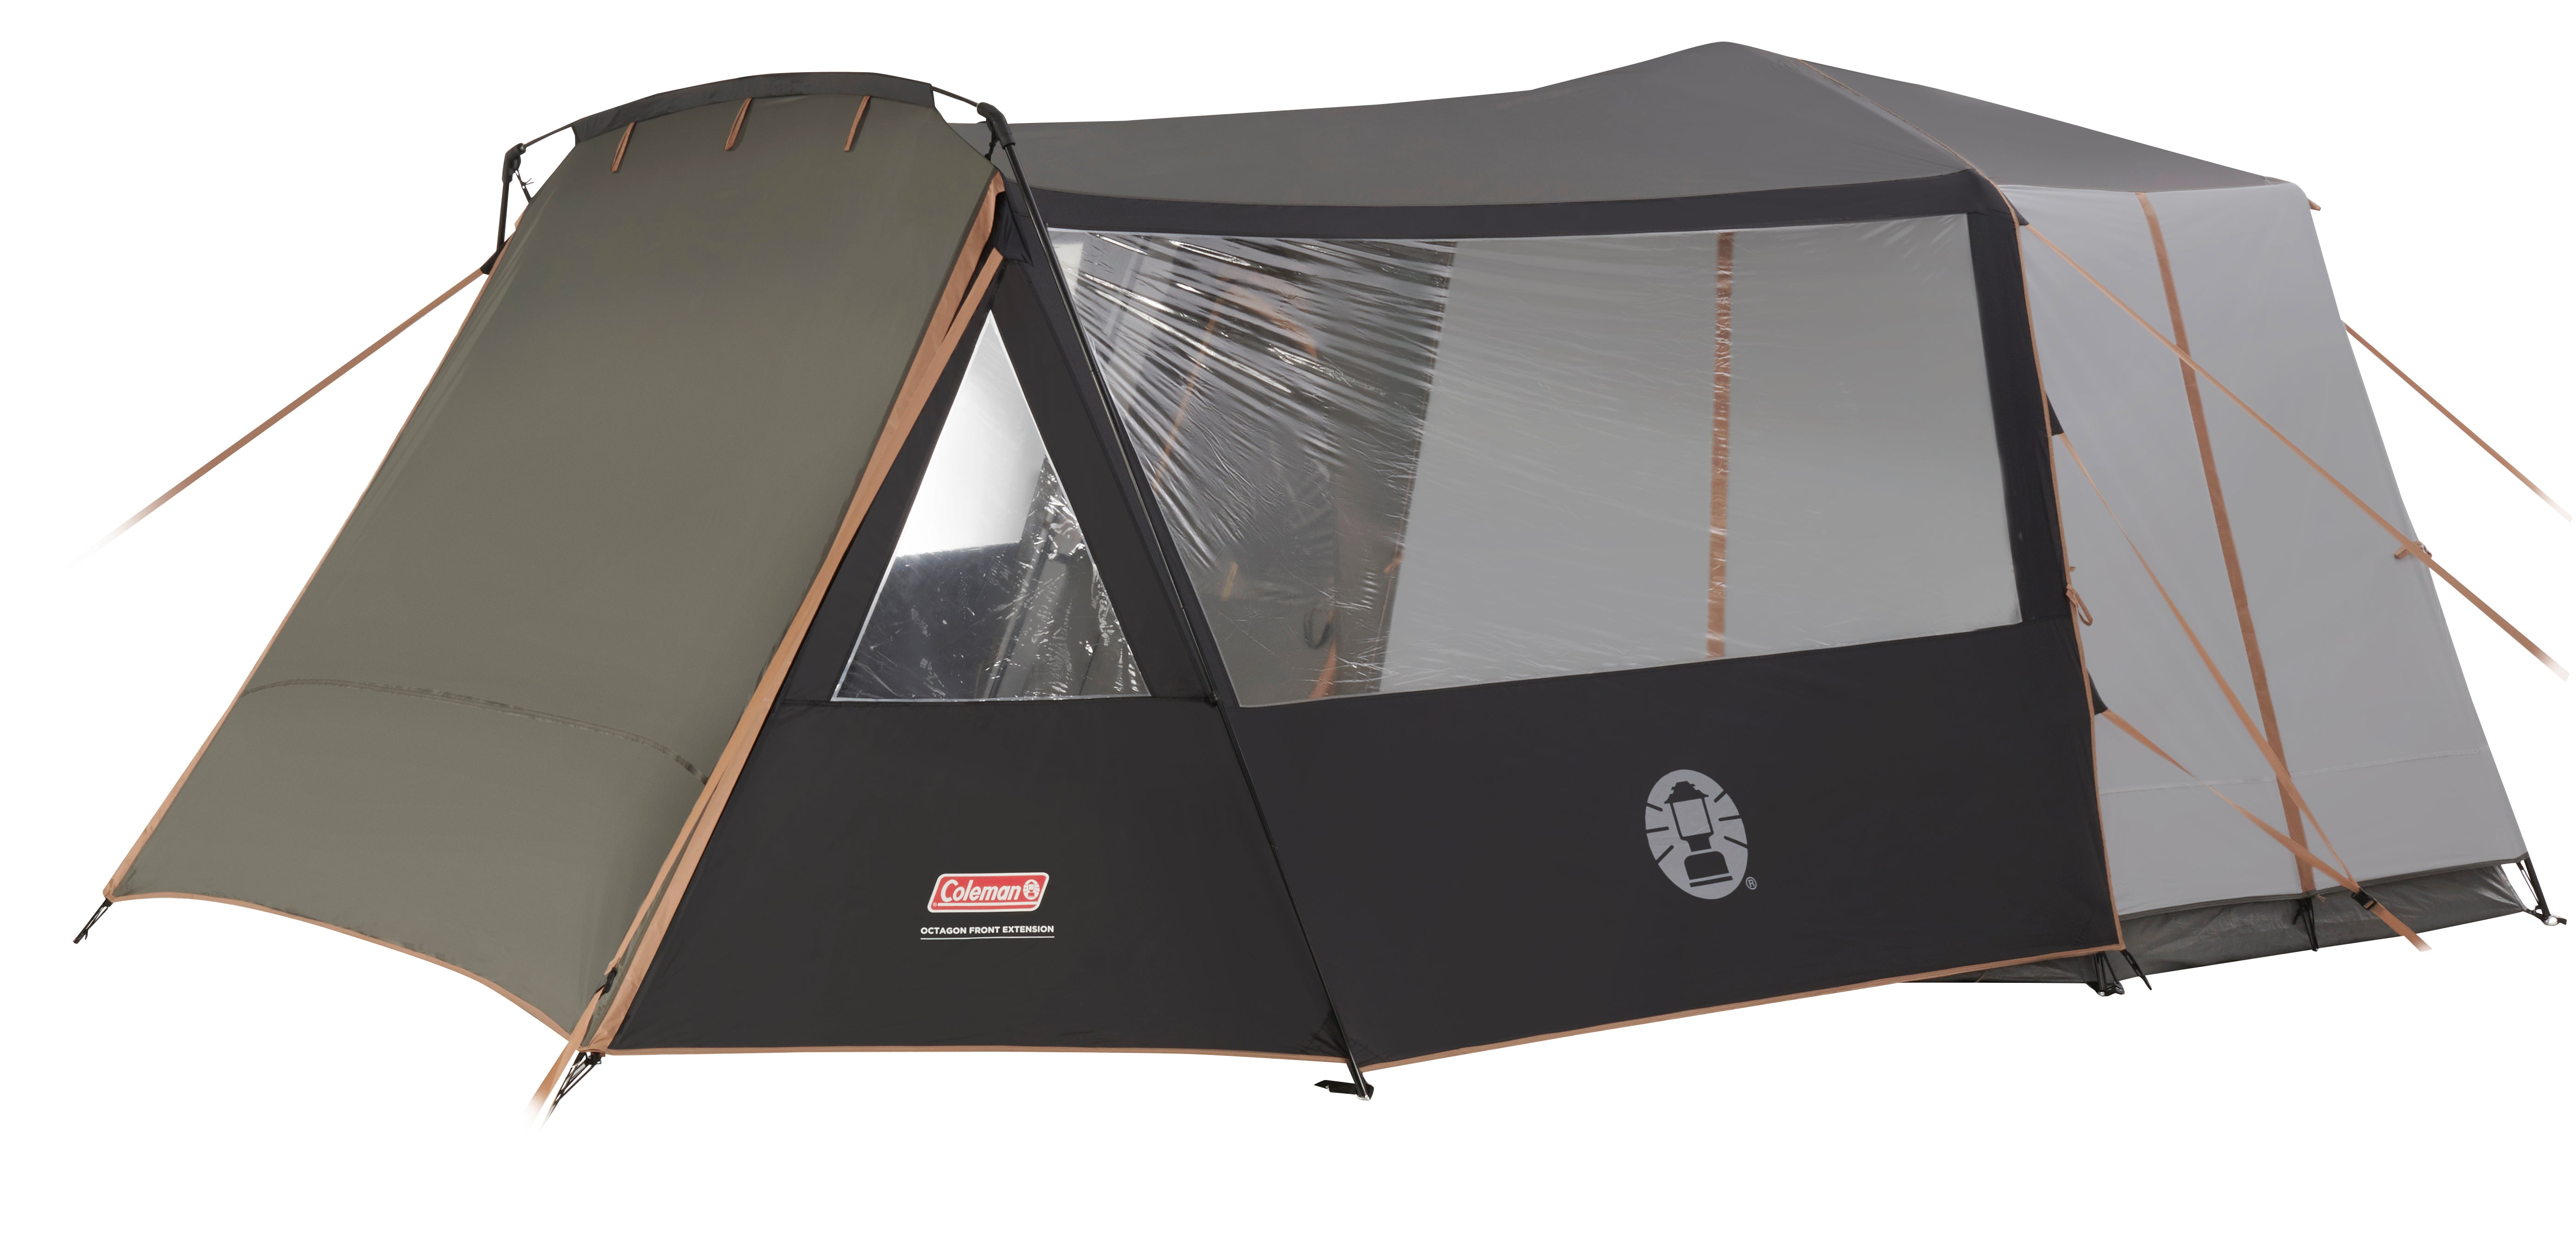 Coleman Polycotton Tent Wholesale Discounted